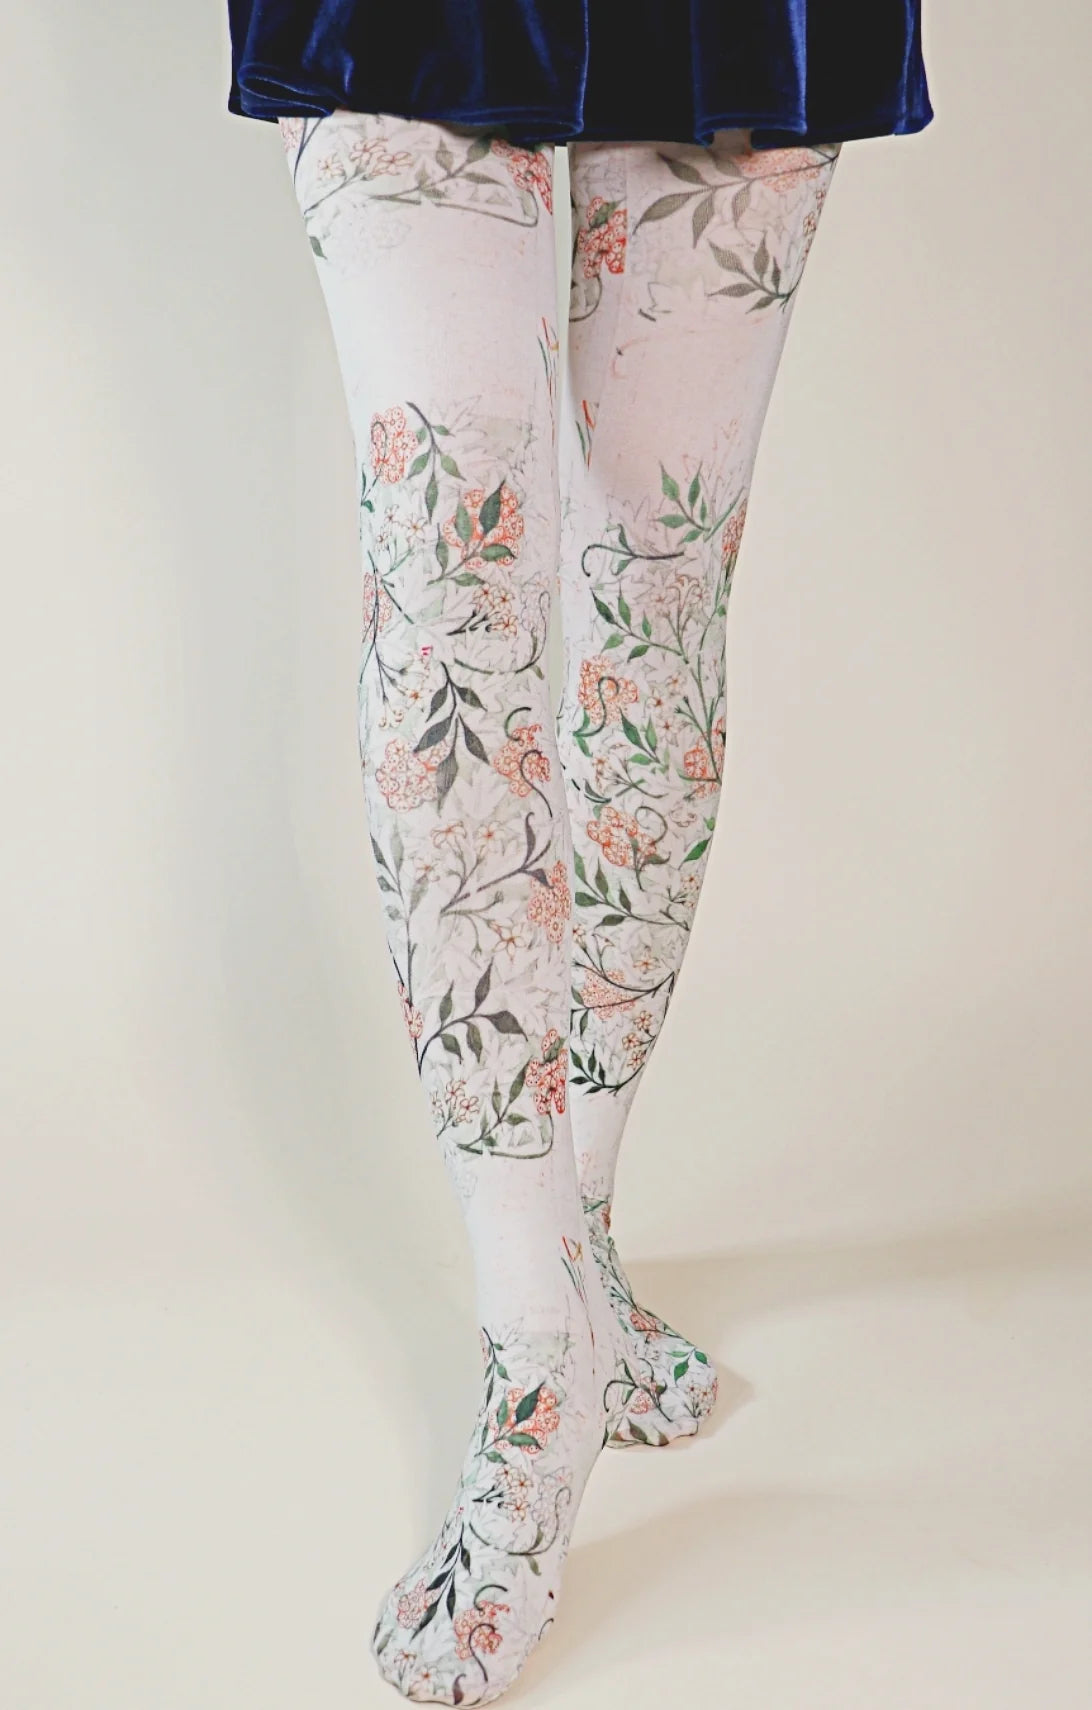 Female leg wearing a velour navy blue skirt with Tabbisocks Jasmine by William Morris Printed Art Tights